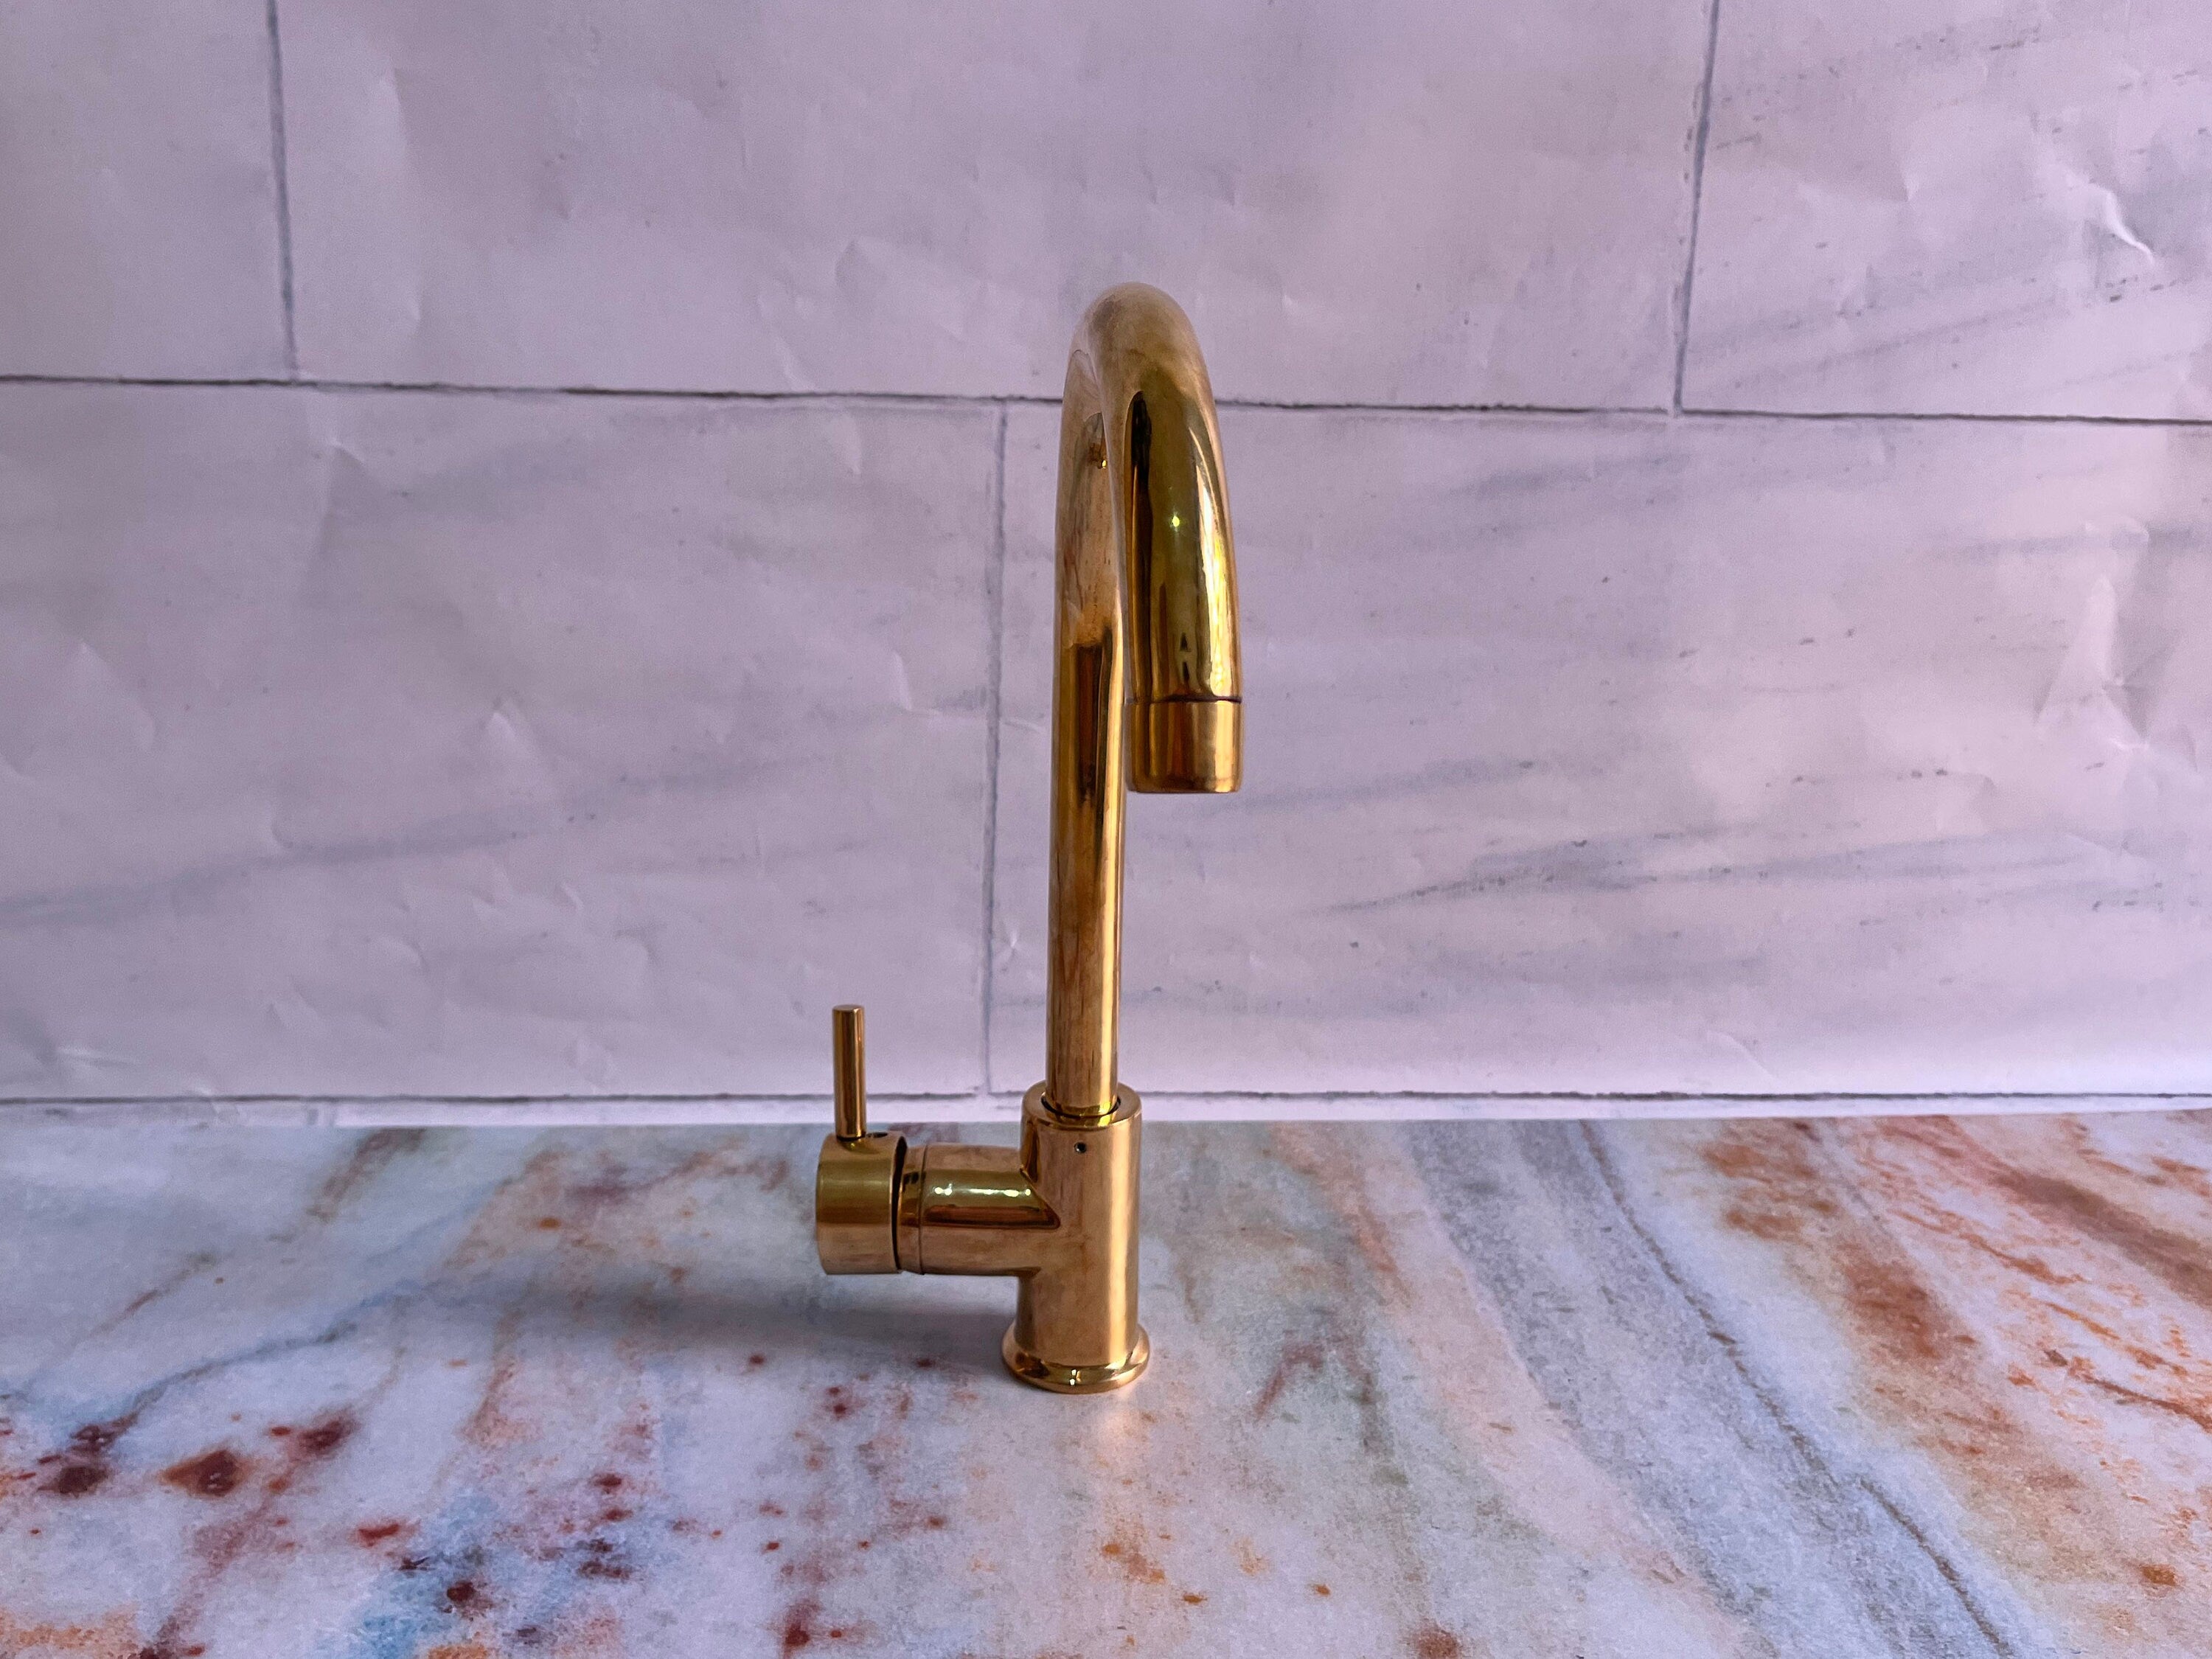 Unlacquered Brass Single hole Kitchen Faucet Zayian